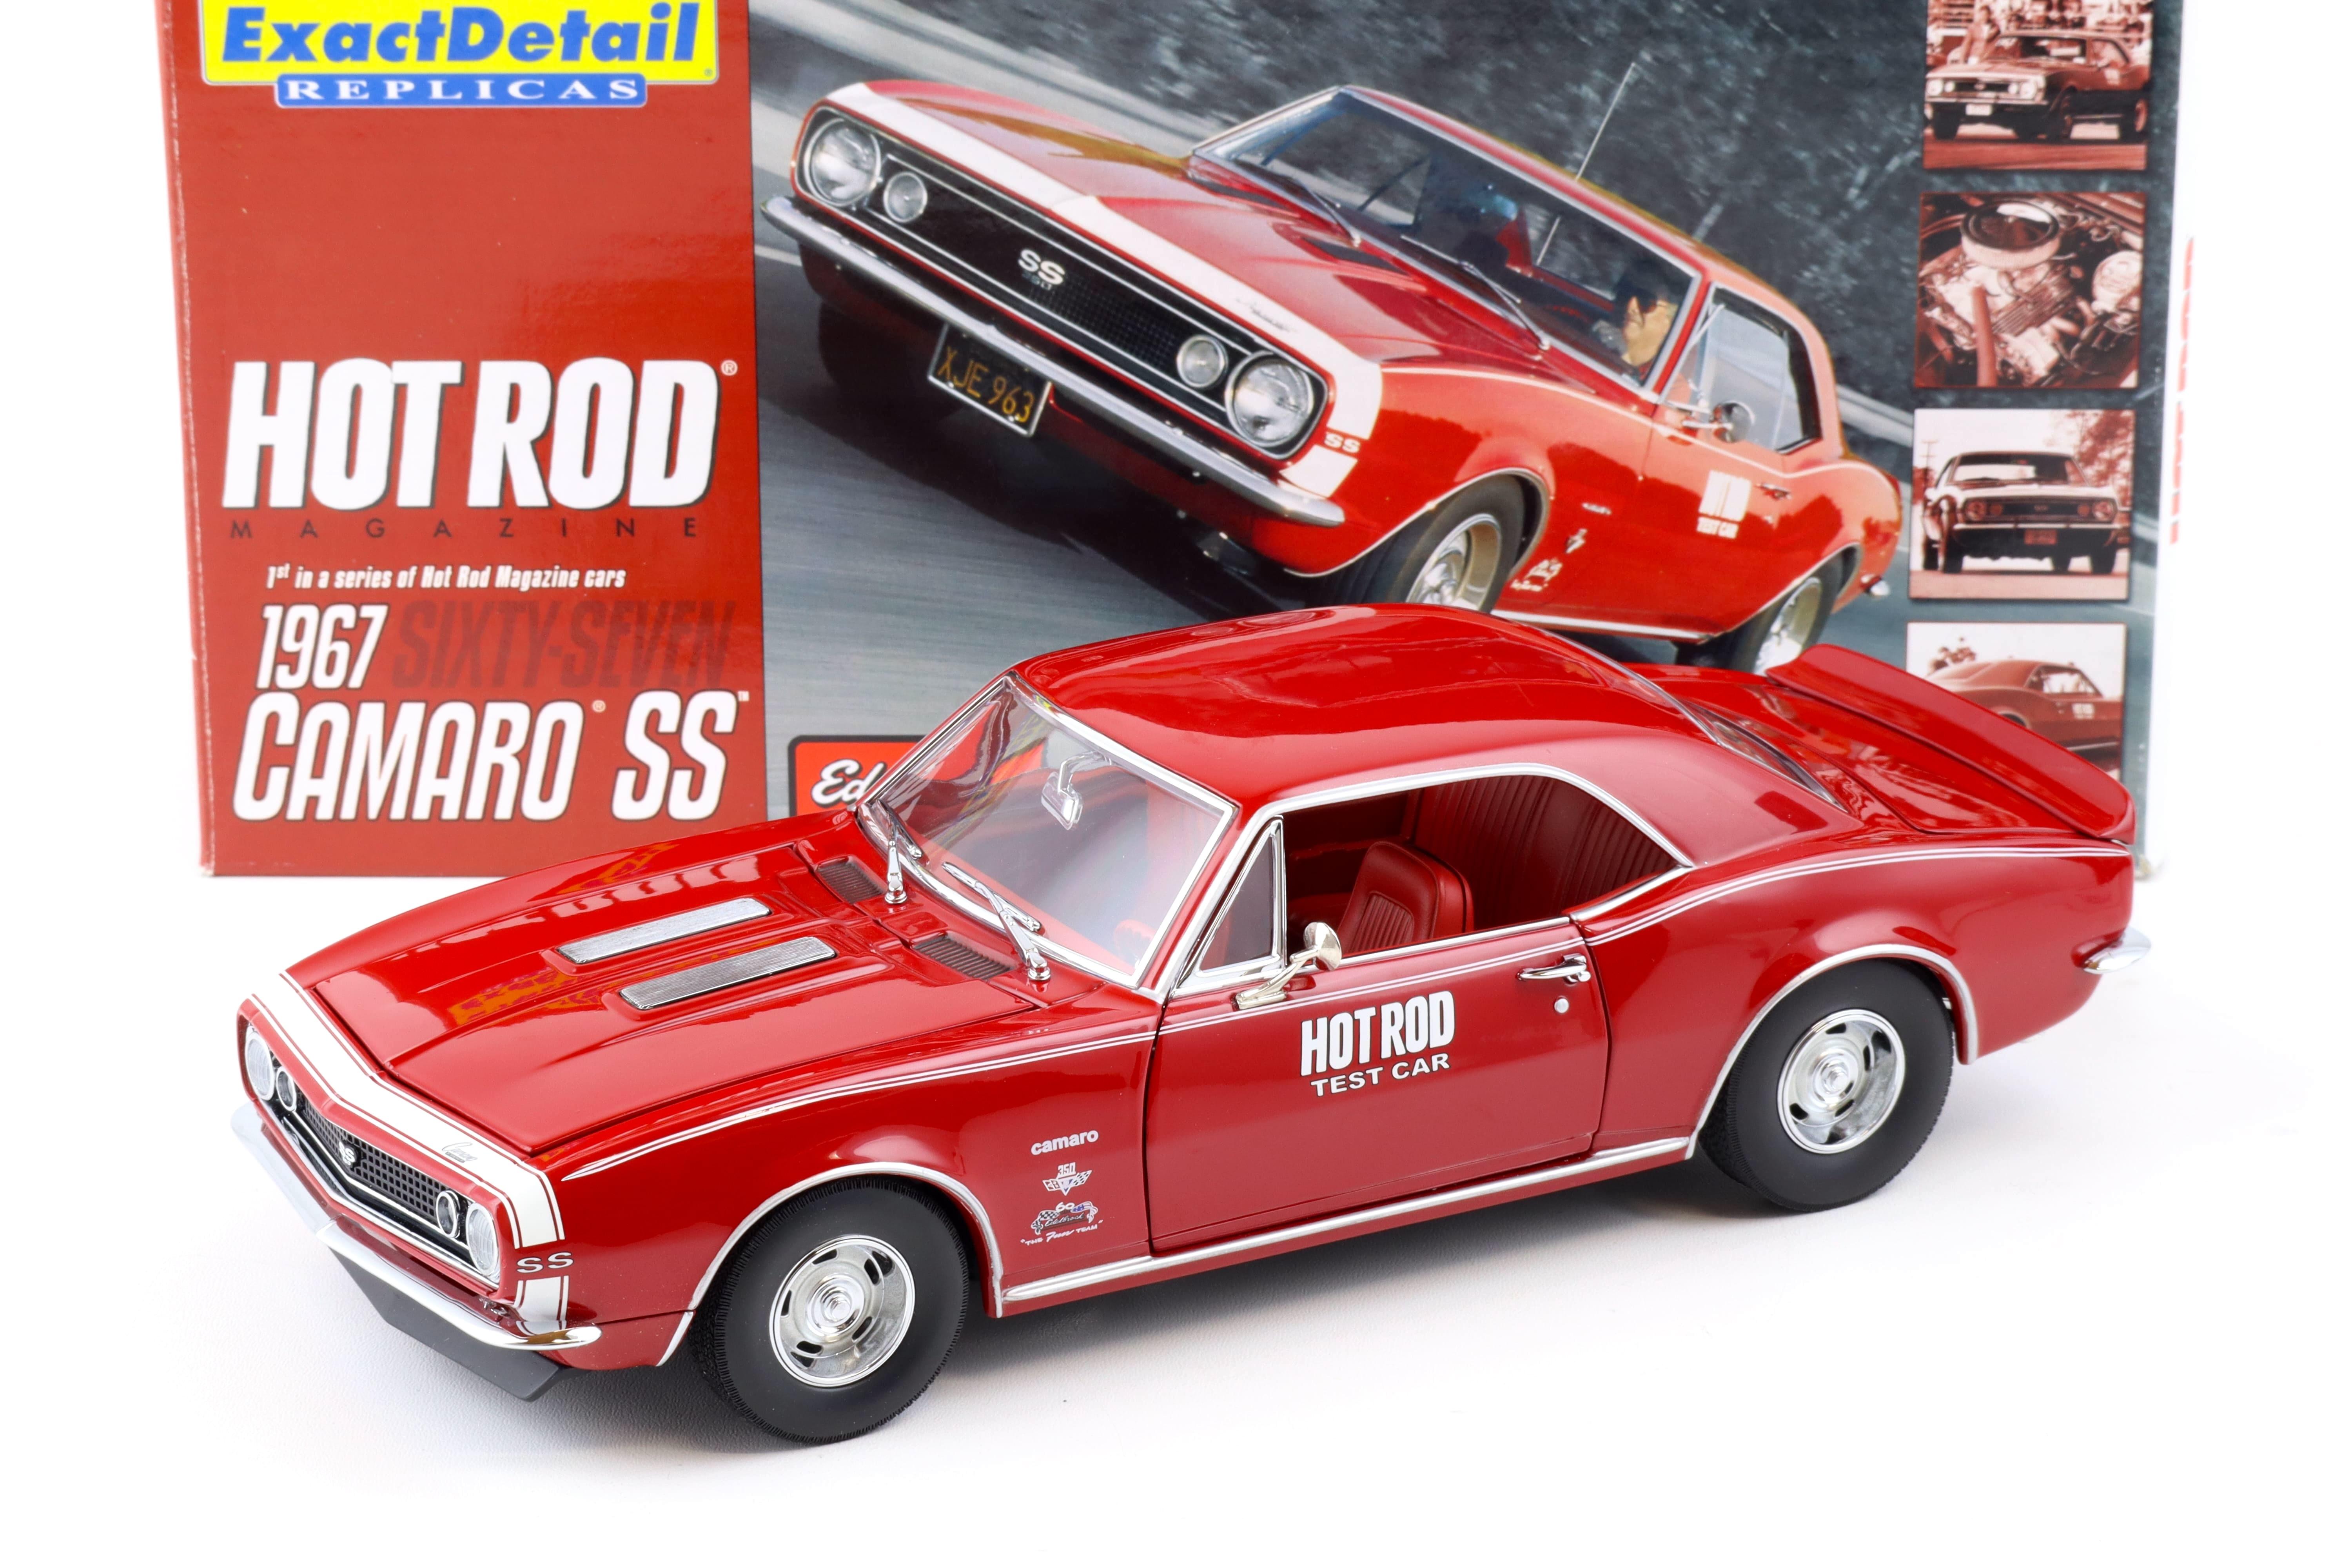 1:18 Exact Detail 1967 Chevrolet Camaro SS Coupe Hot Rod Test Car red WCC220